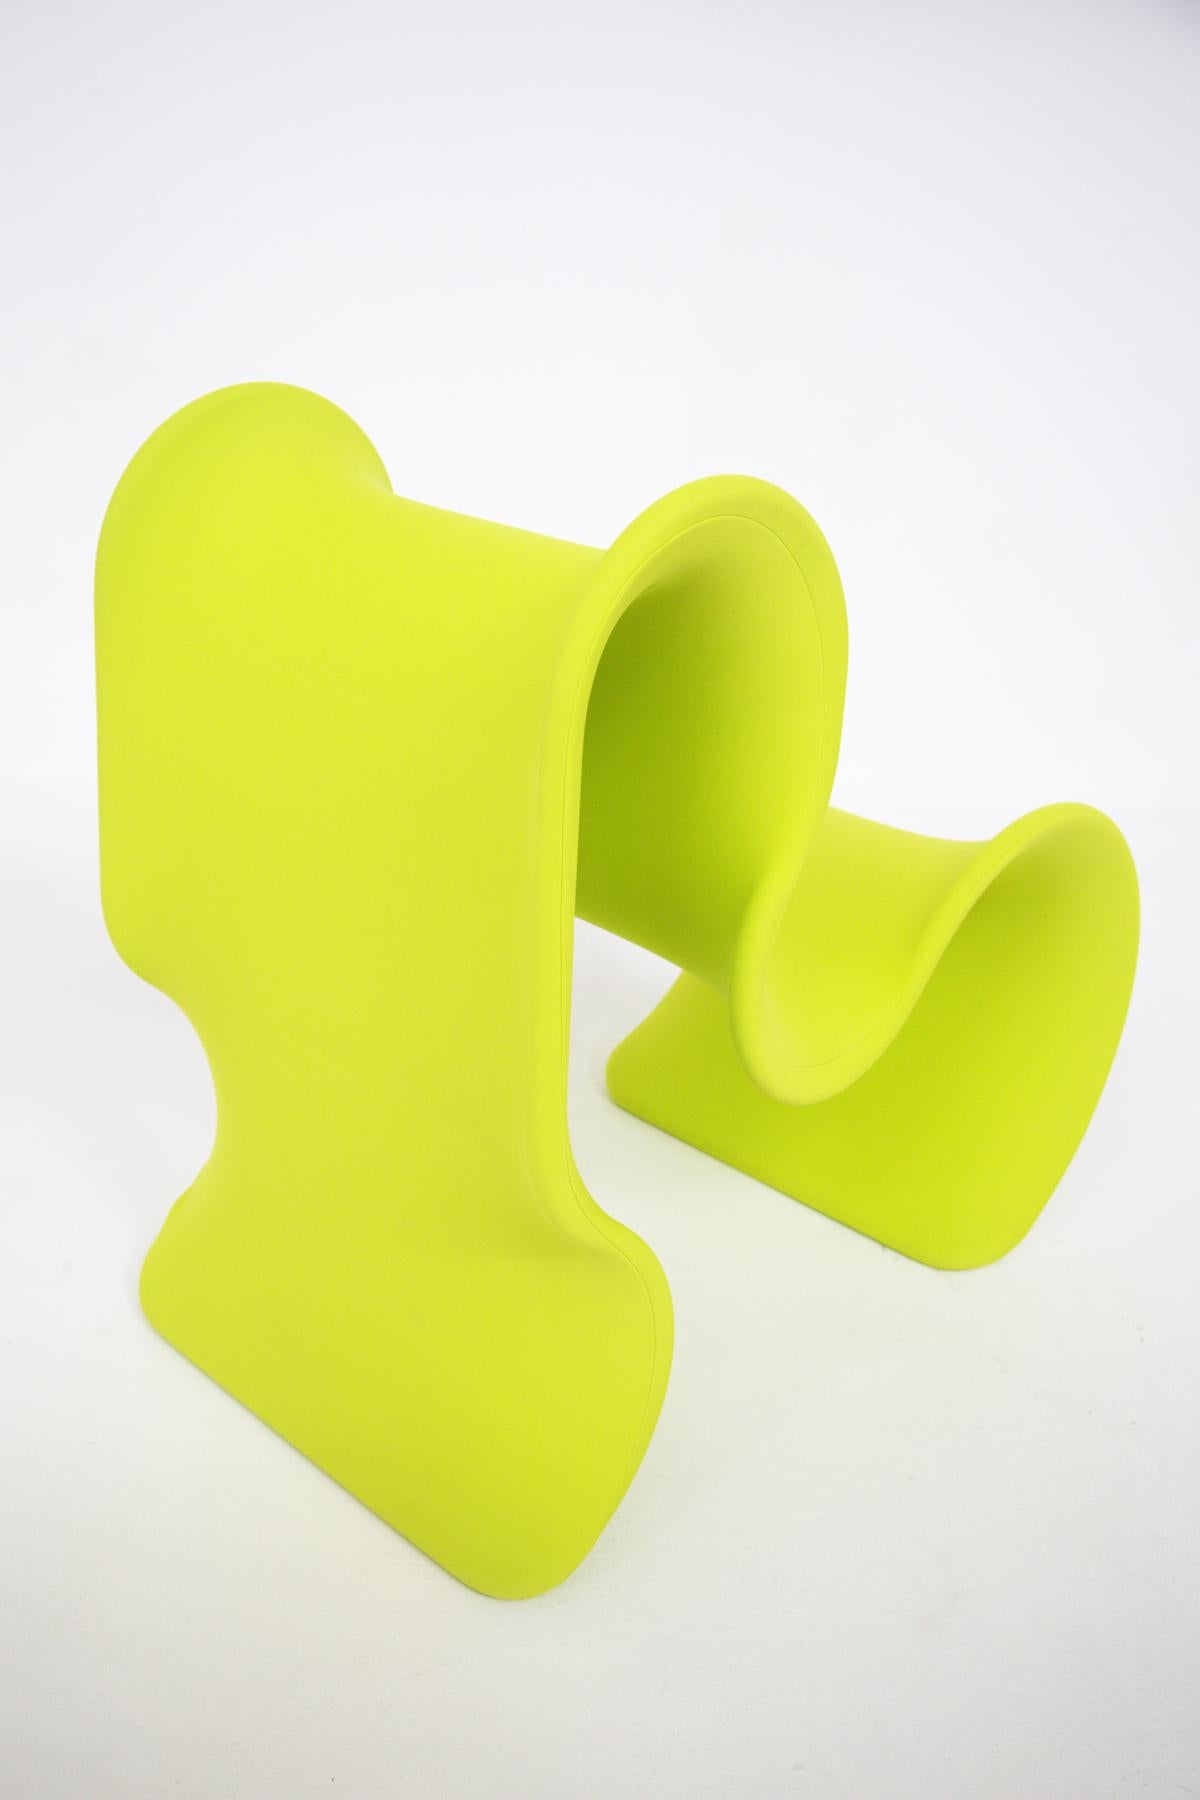 Gianni Pareschi Armchair Fiocco Acid Green for Busnelli For Sale 11